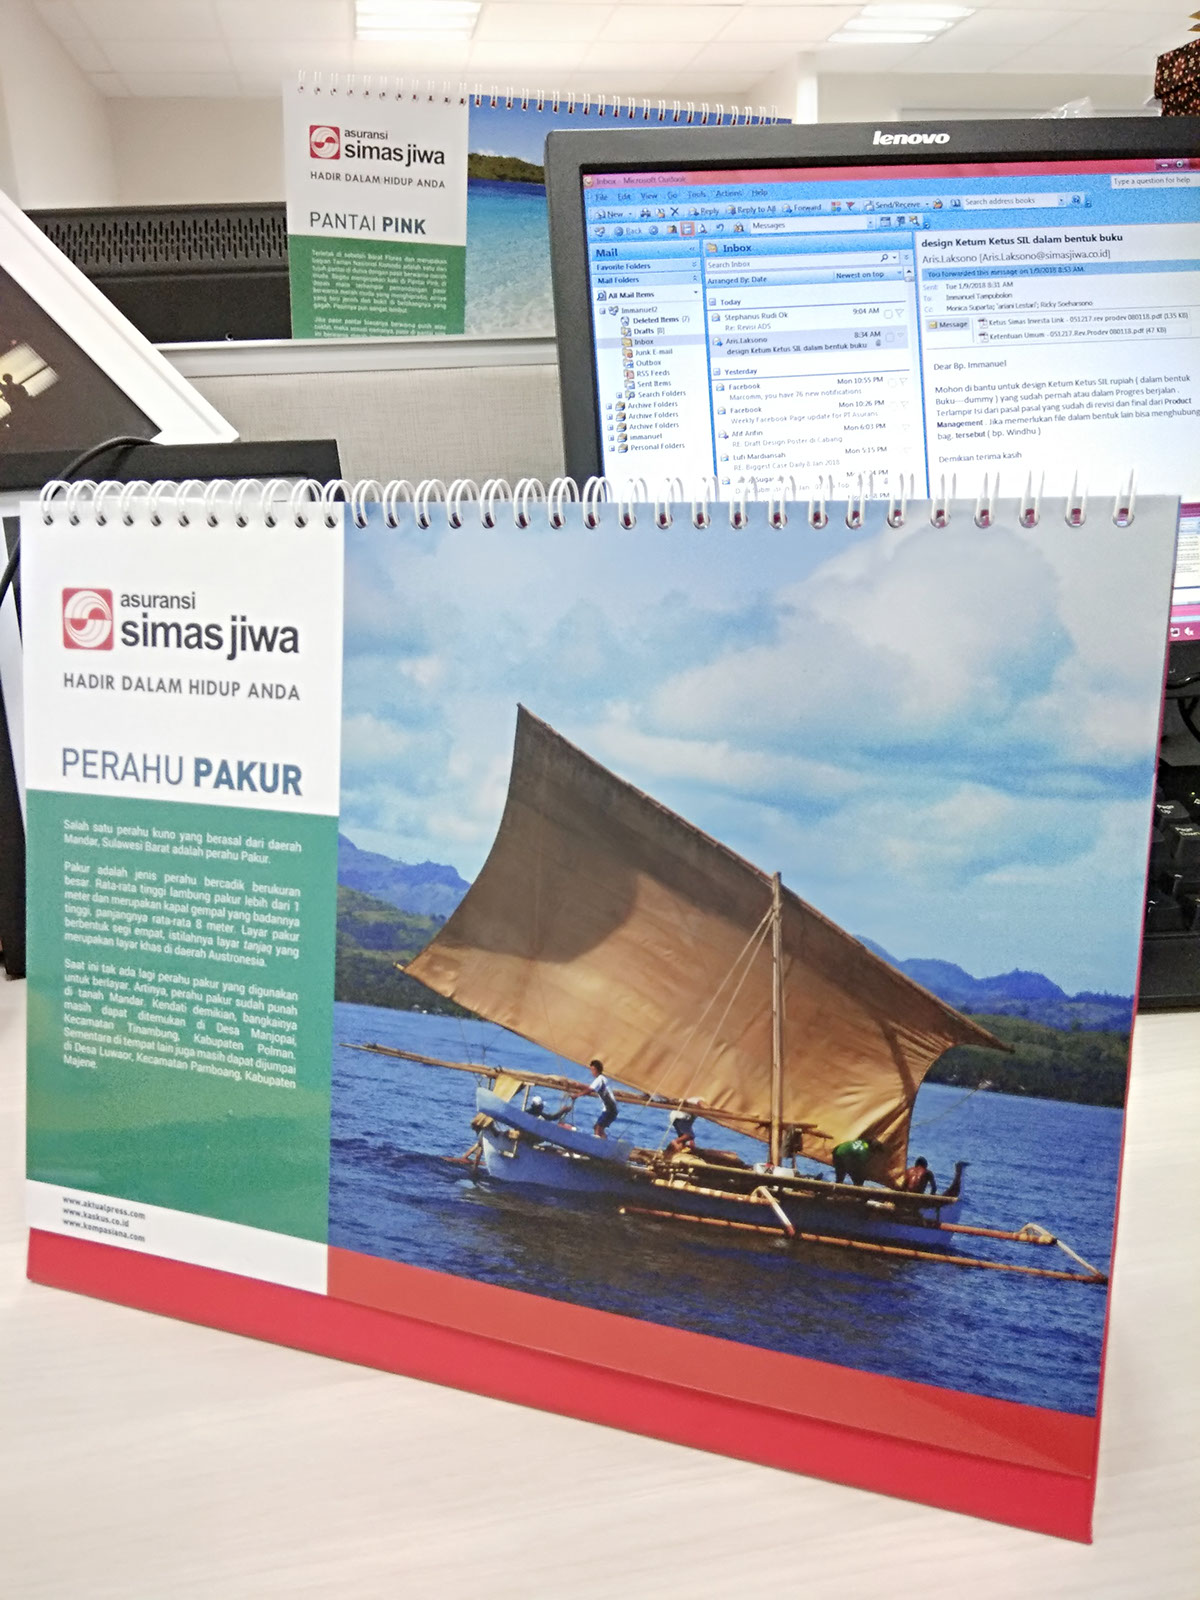 This is the 2018 calender I made for the company I work. With maritime theme which is blue and turquoise combined with company identity color which is red.